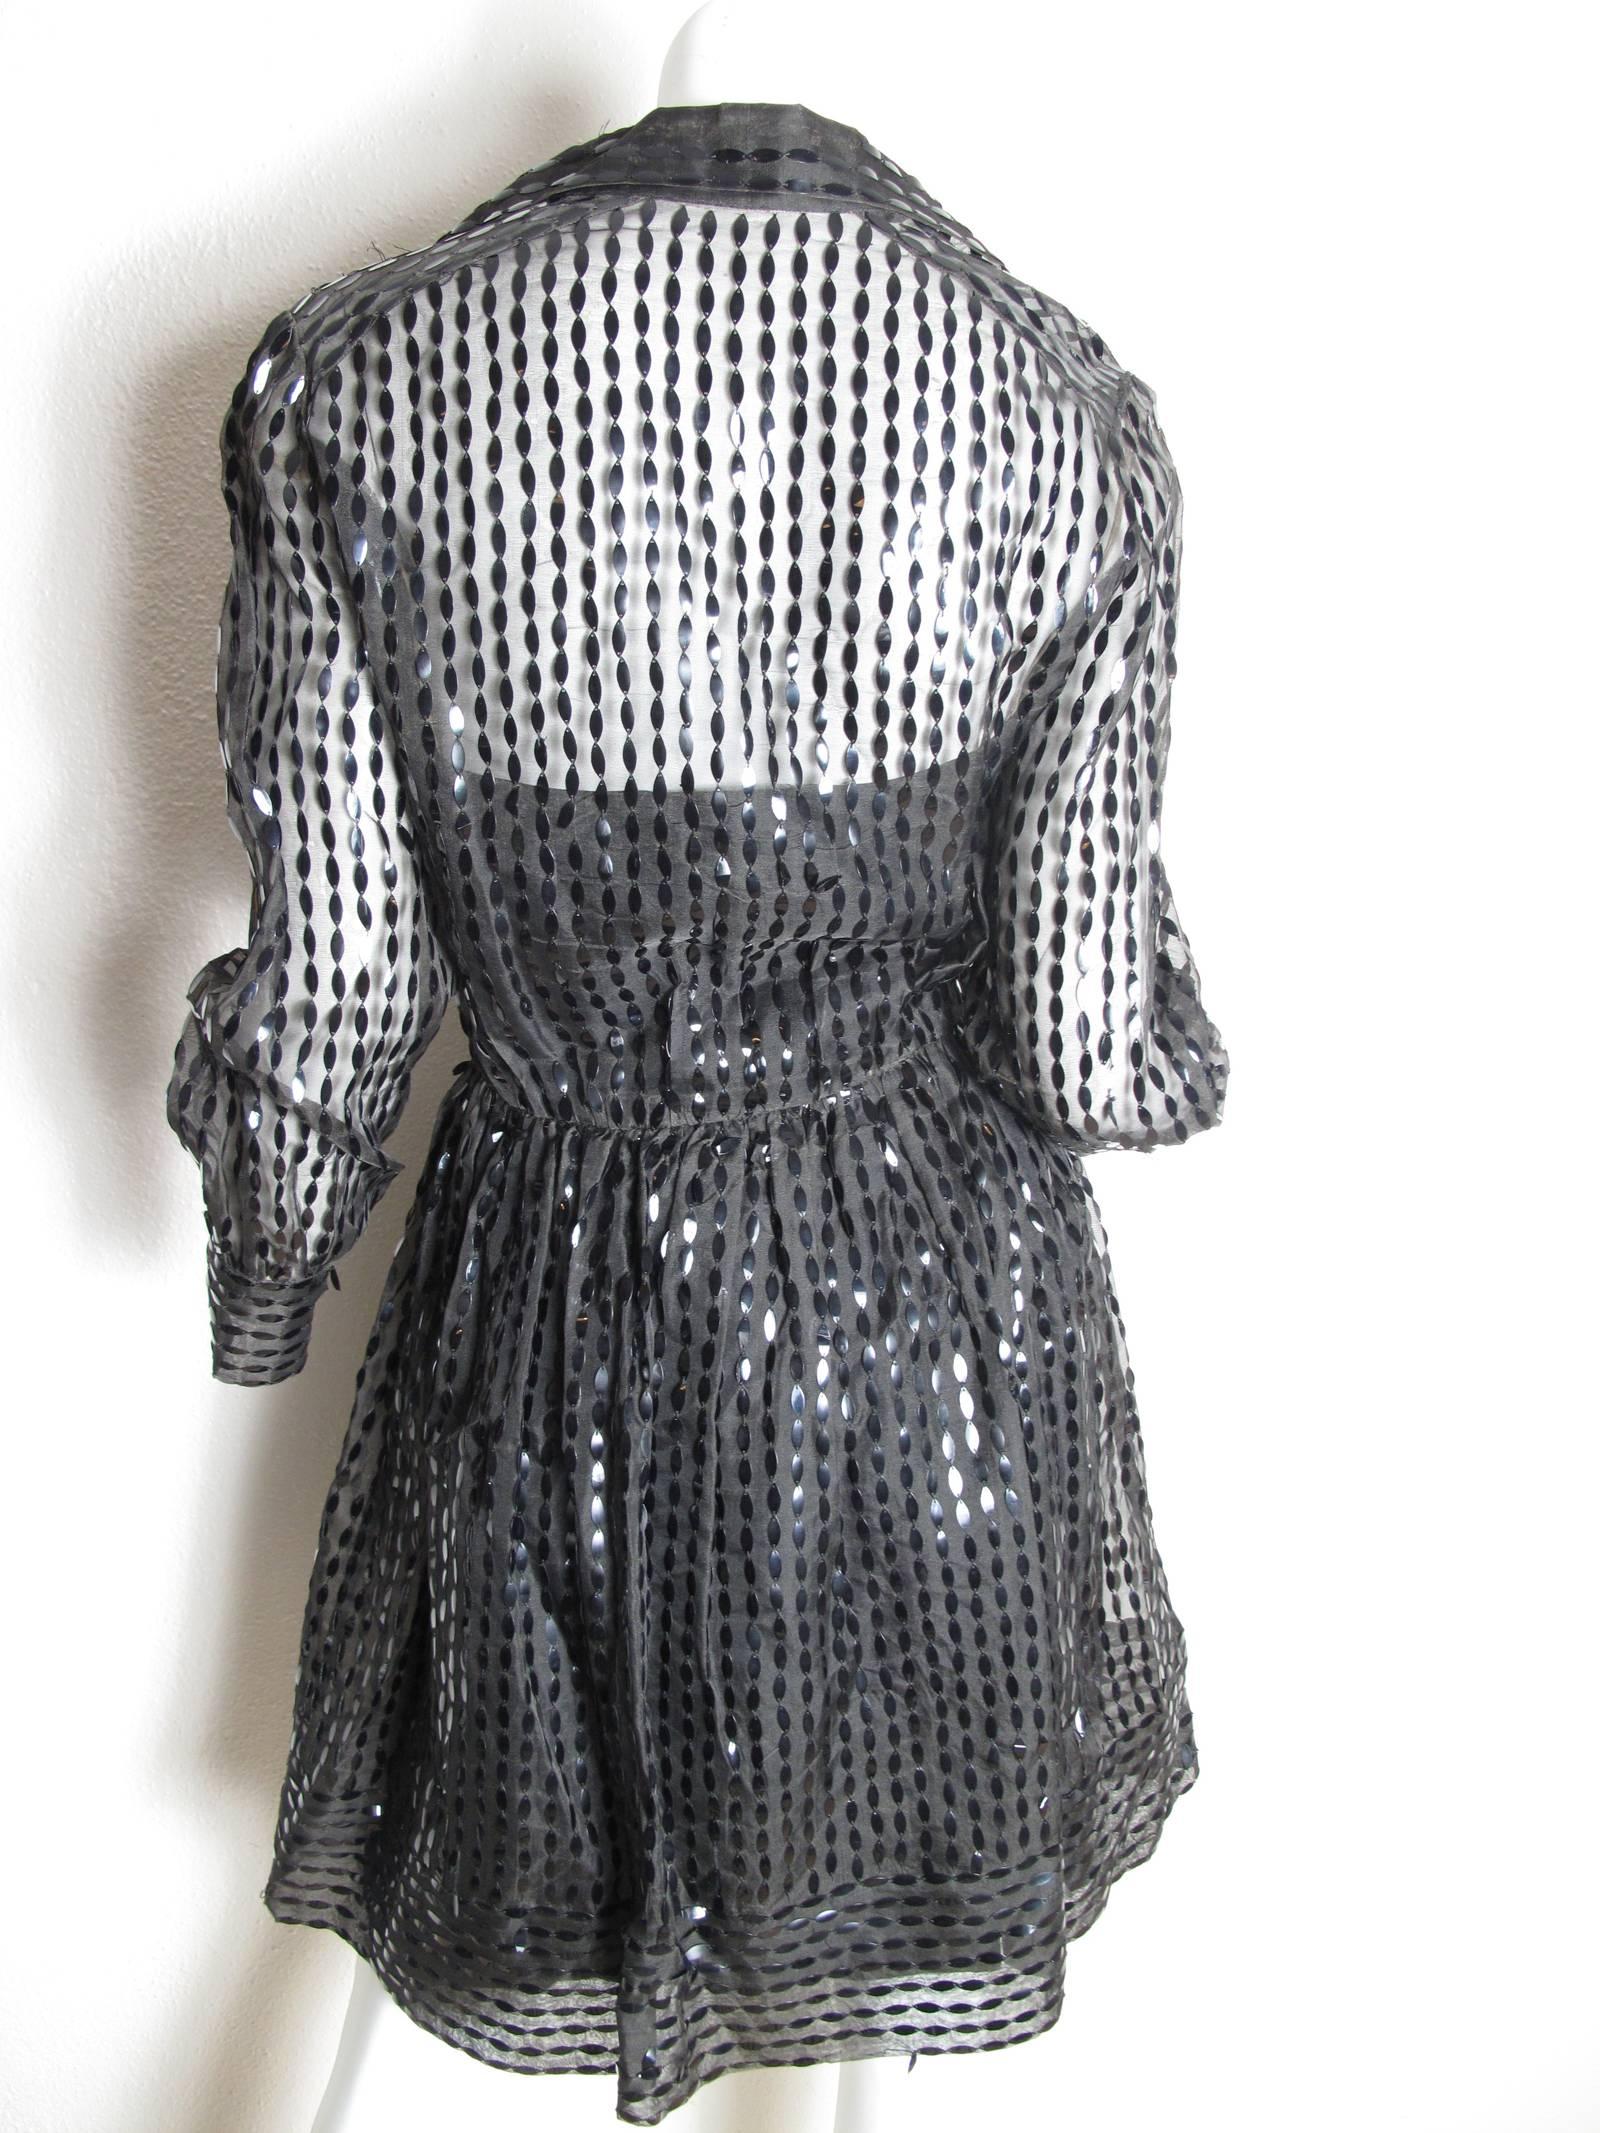 Mollie Parnis black sheer dress with sequins with slip underneath.  Condition: AS IS, many sequins missing.  Size 6 - 8

 We accept returns for refund, please see our terms.  We offer free Ground shipping within the US.  Please let us know if you